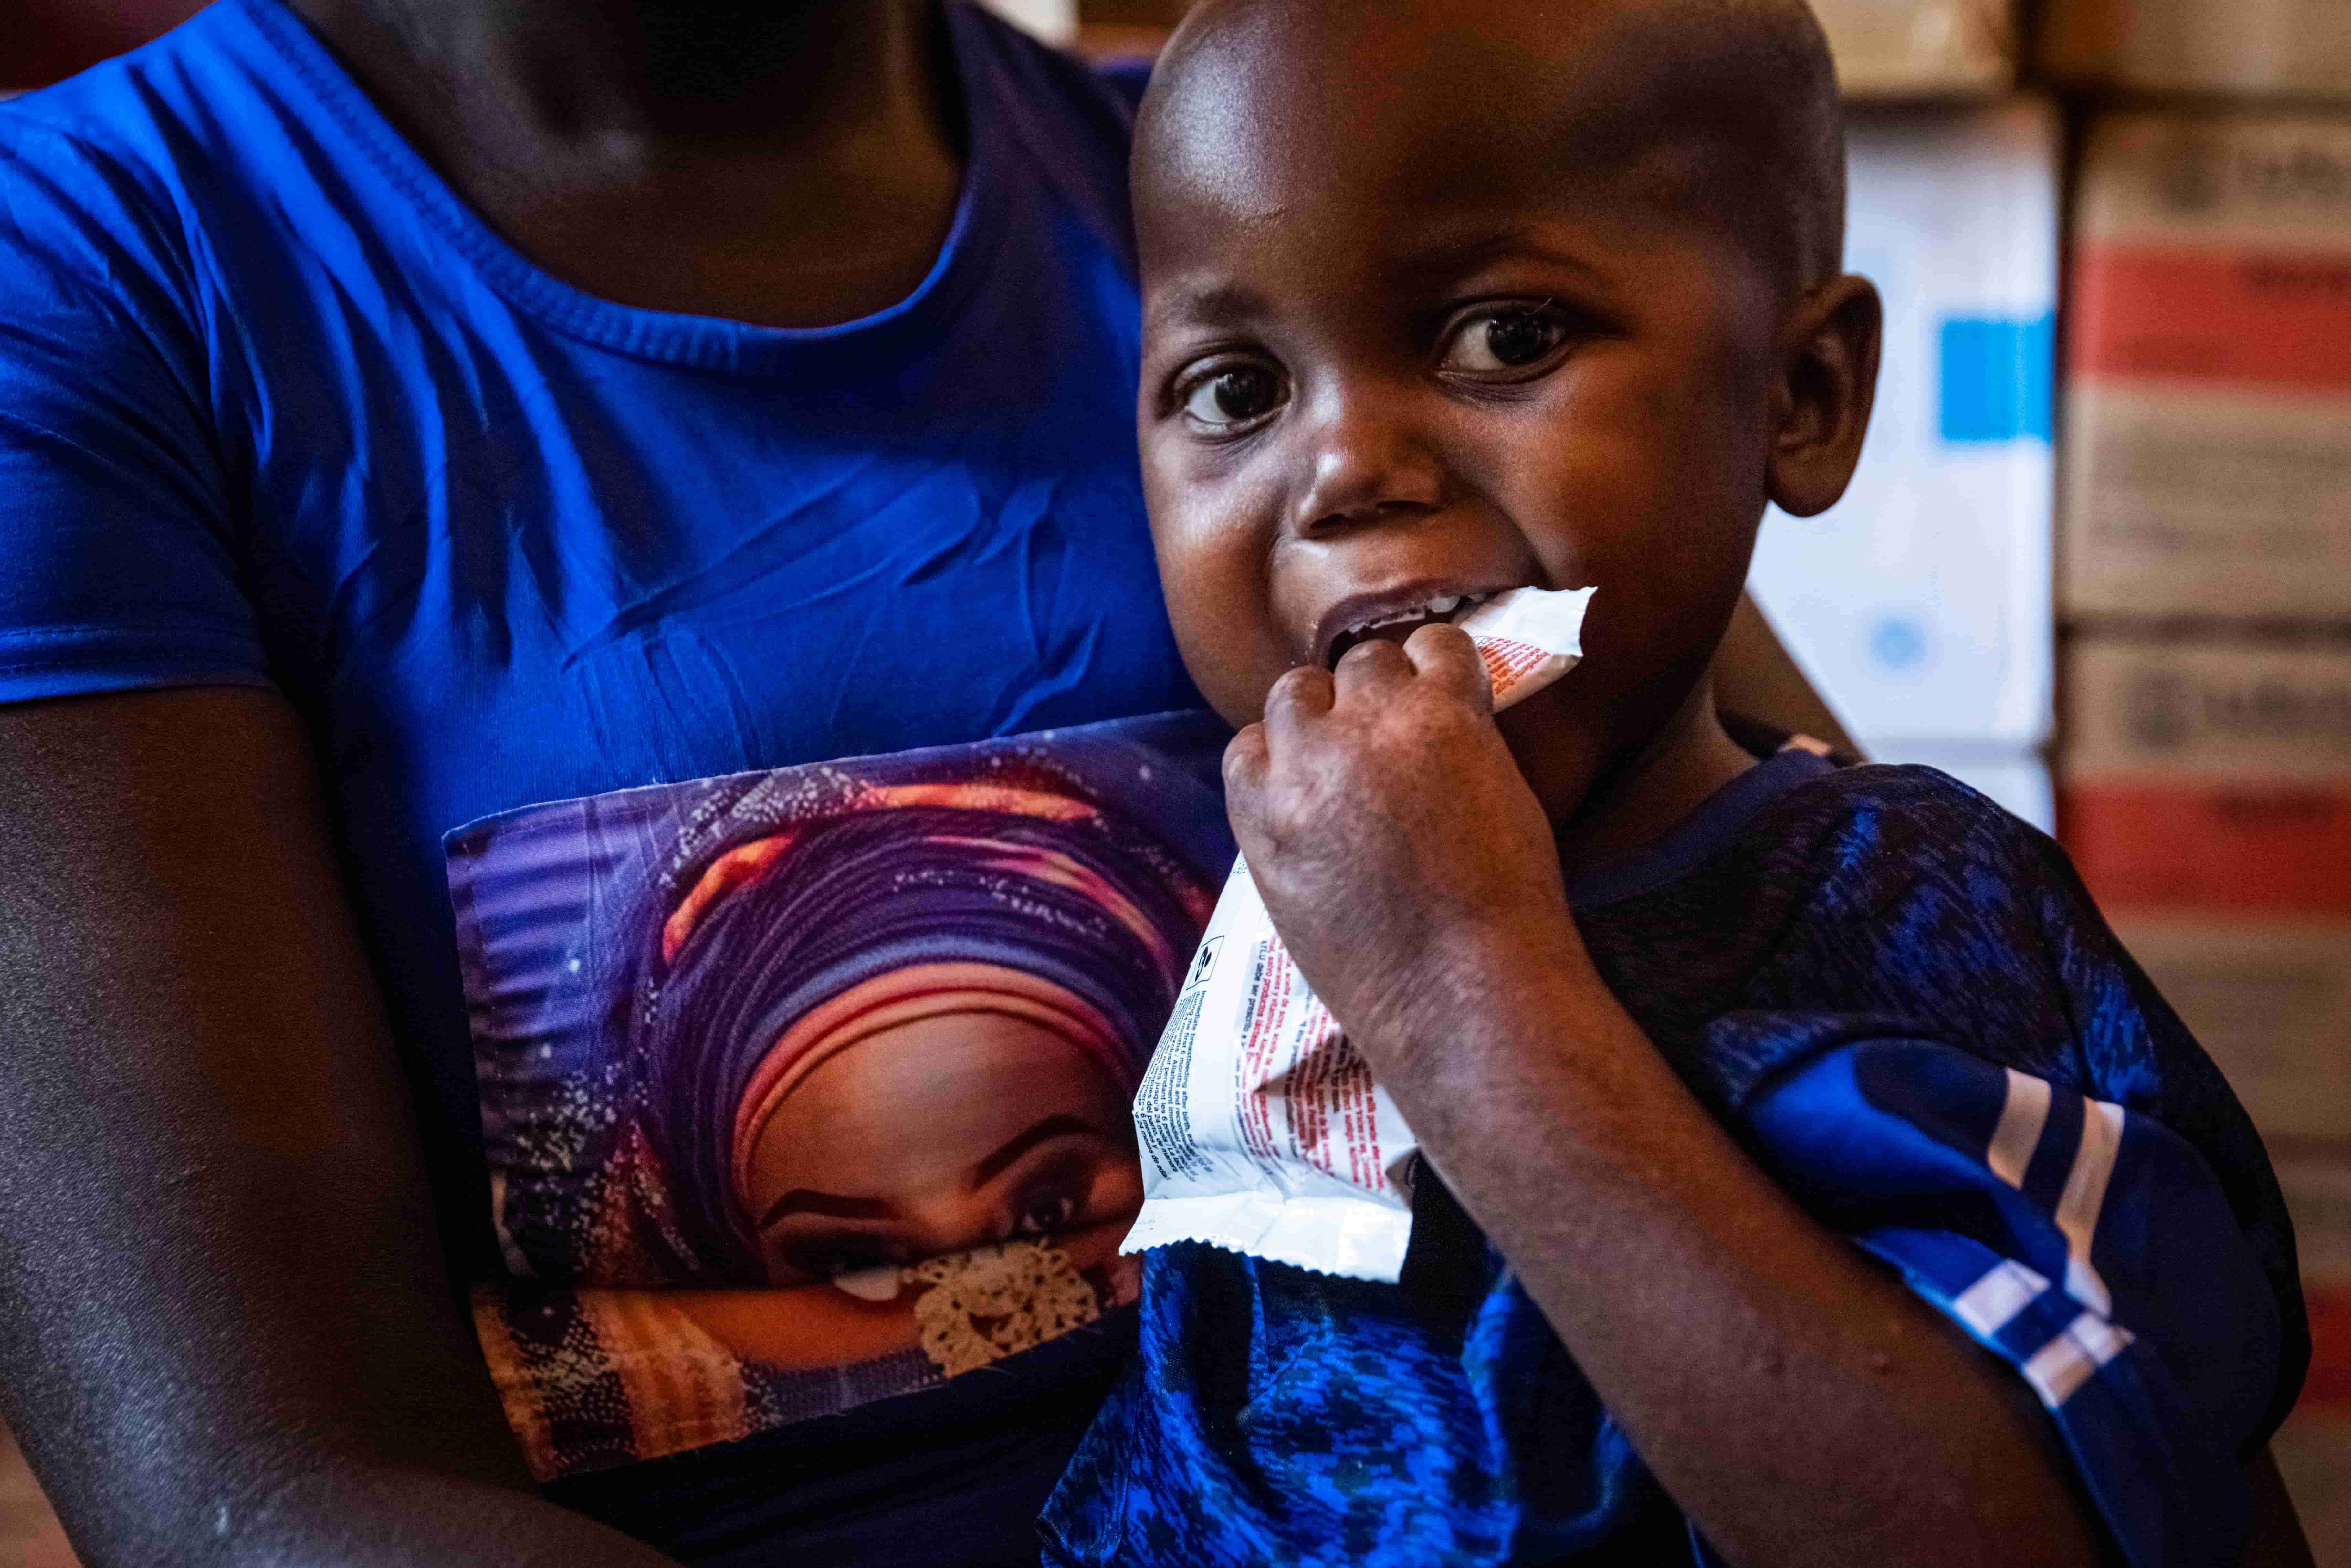 Infant eating therapeutic food to treat malnutrition